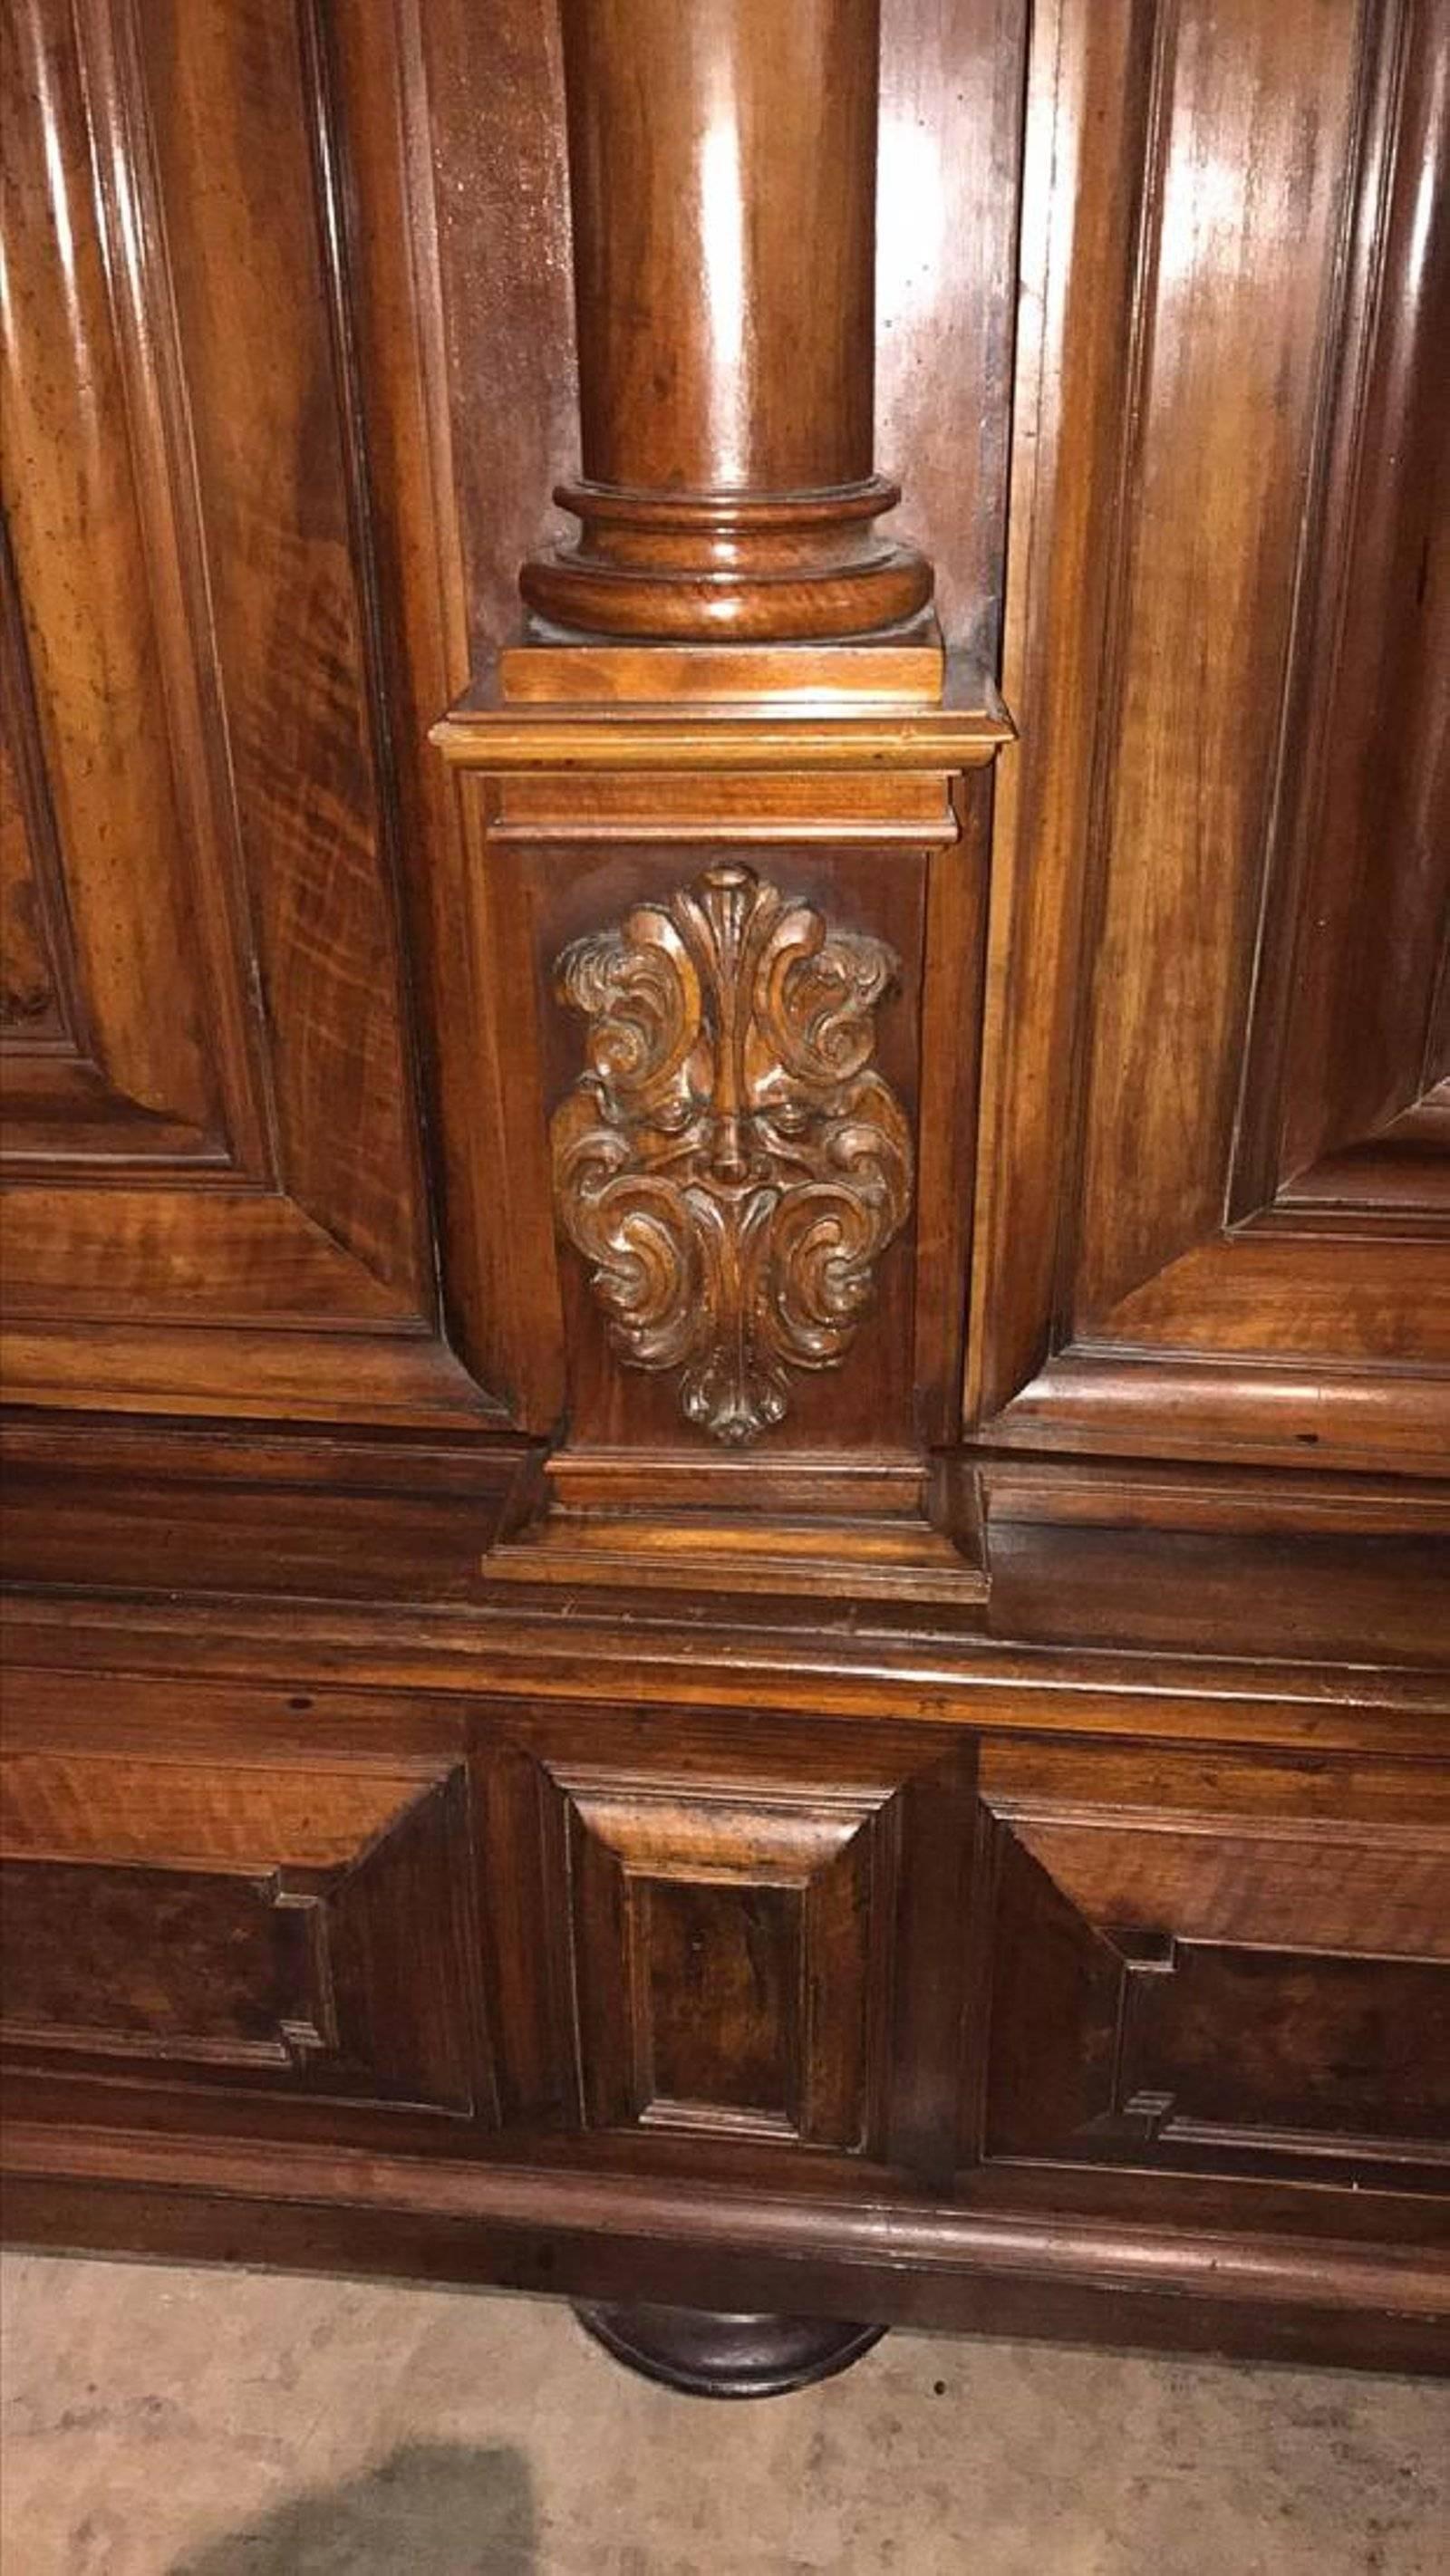 Very fine 18th century Italian Tuscan two-door cabinet with raised inset burled walnut panels. The bonnet with a carved acanthus and putti mask above turned columns with ionic and Tuscan capitals.

The lower most with intricate carvings of